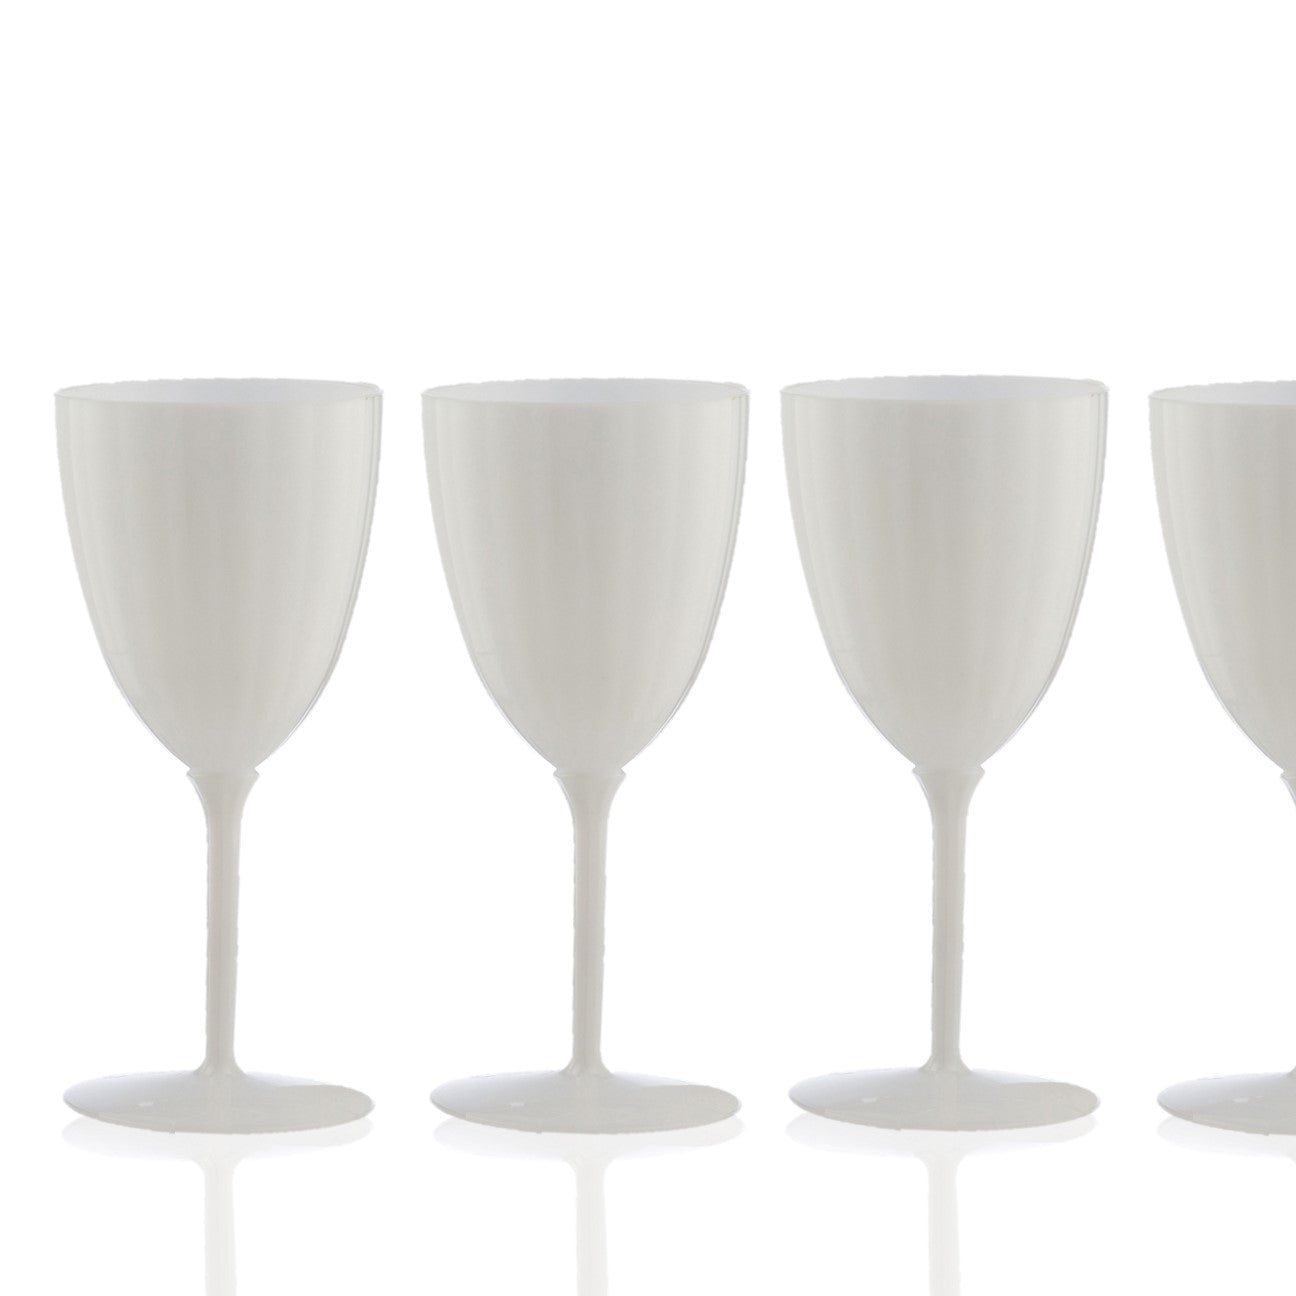 96 Goblets, 7 oz. Clear Round Disposable Plastic Wine Goblets